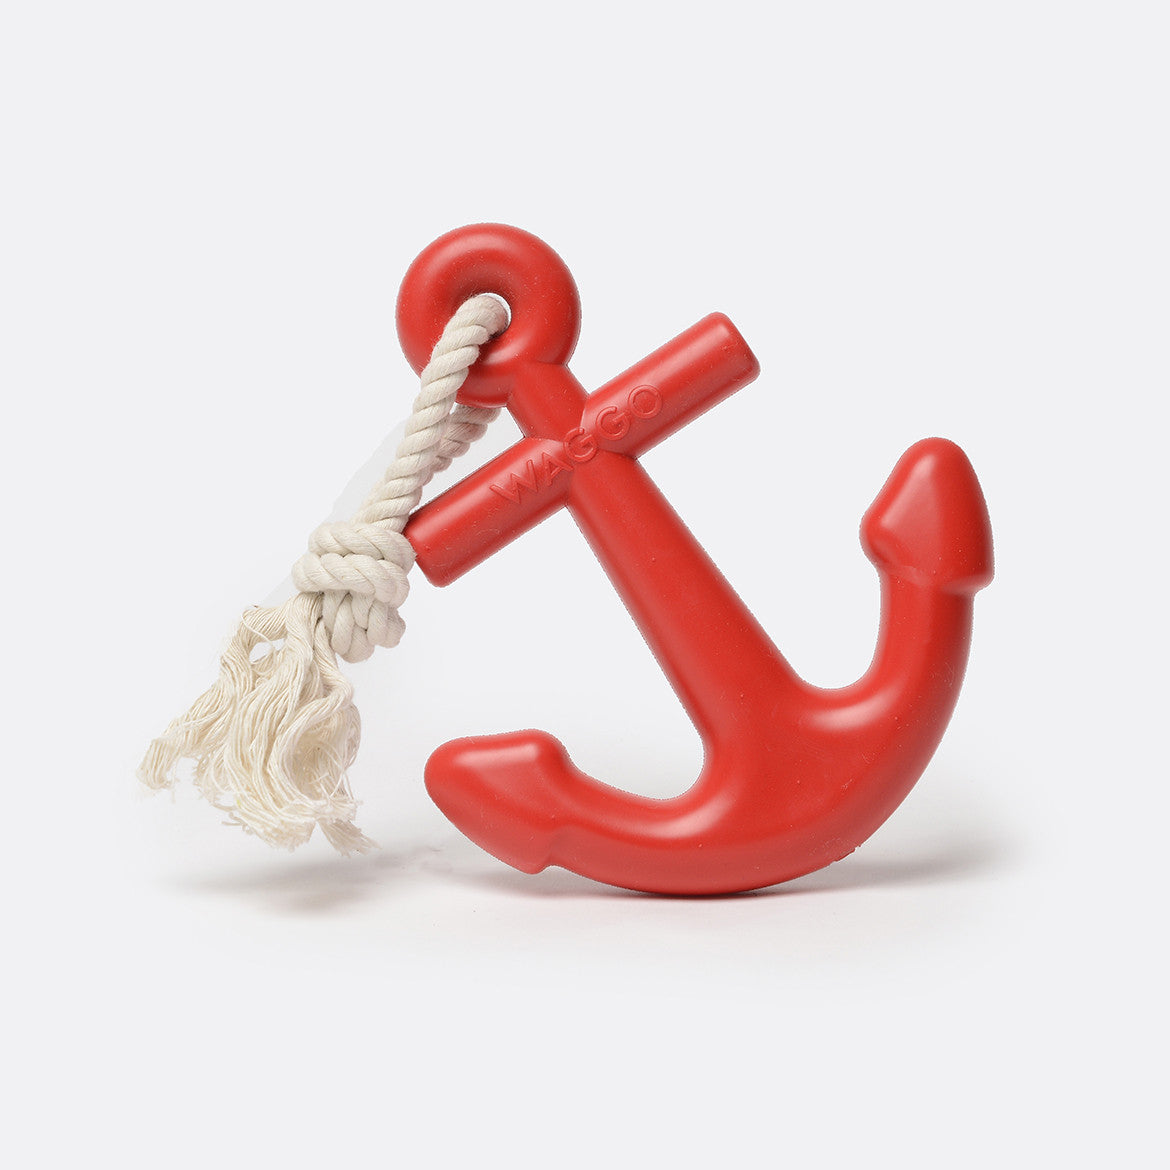  Anchors Aweigh Rubber Dog Toy Waggo Perfumarie